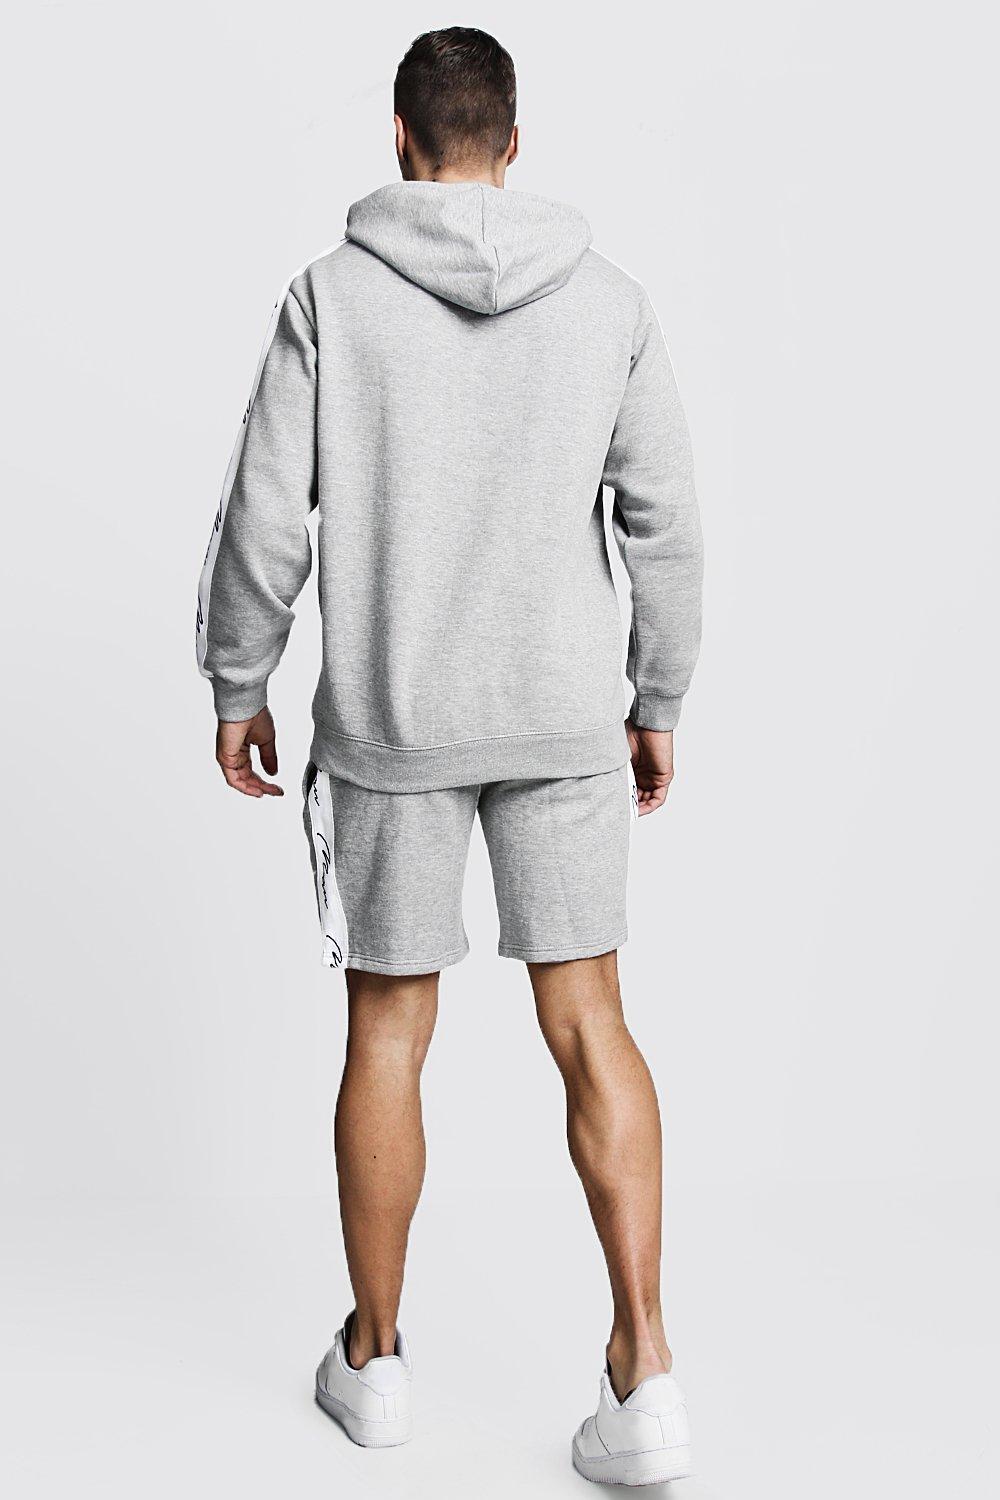 Boohoo Man Signature Tape Hooded Short Tracksuit in Gray for Men - Lyst